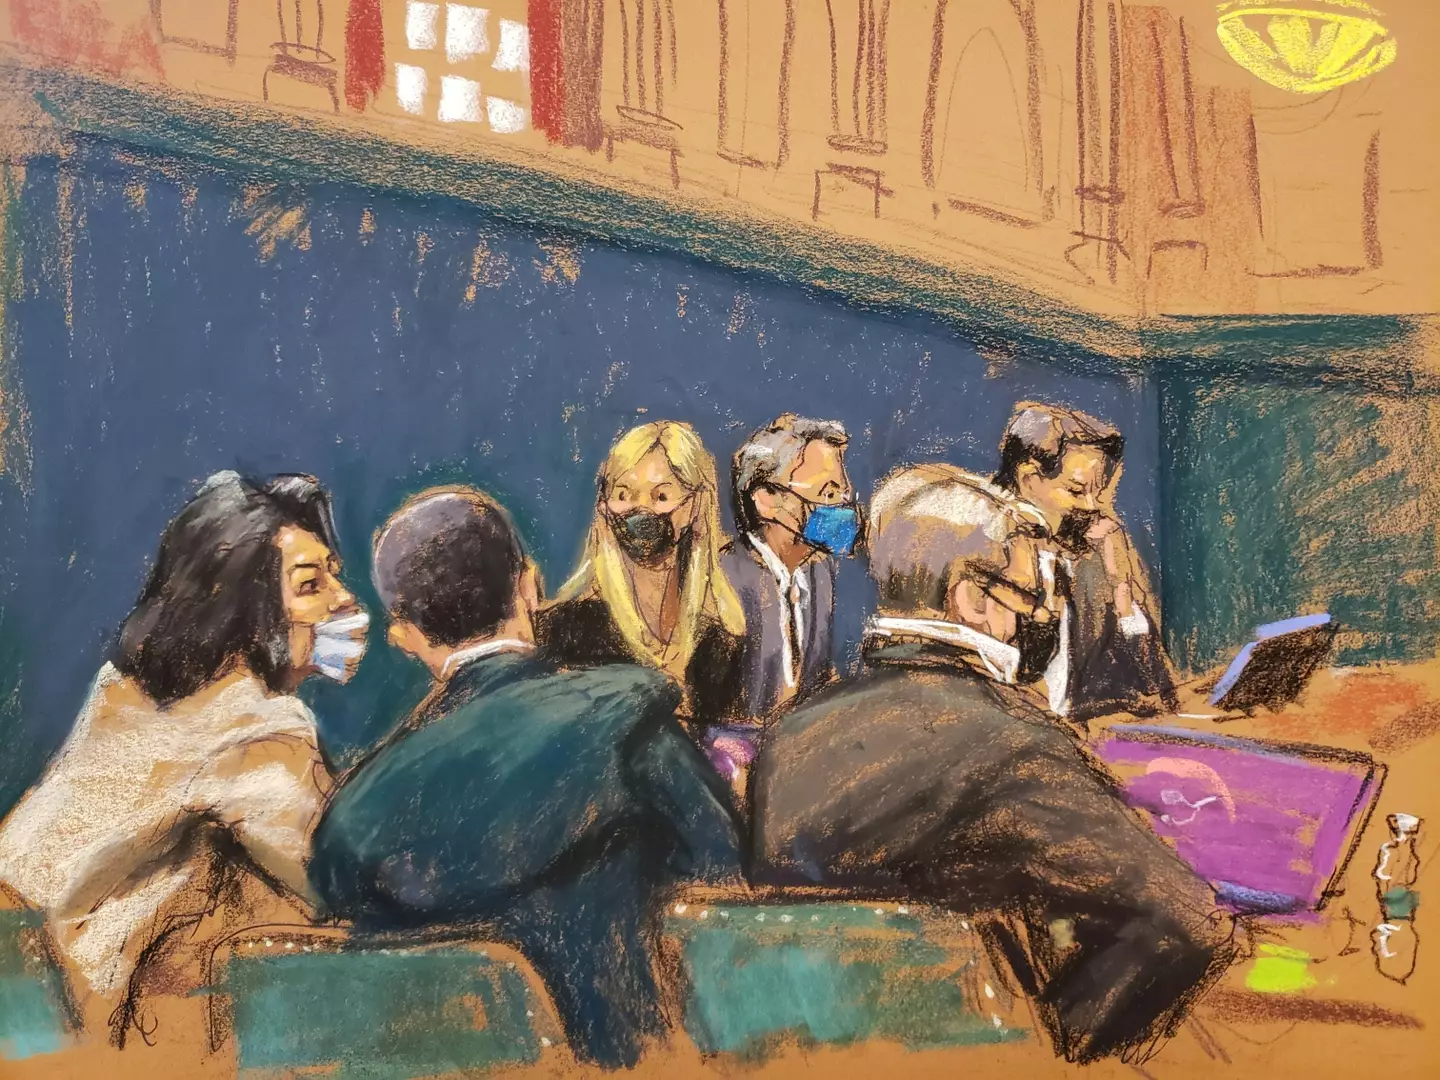 Maxwell sketched in court conferring with her defence team, who may appeal her sentence.